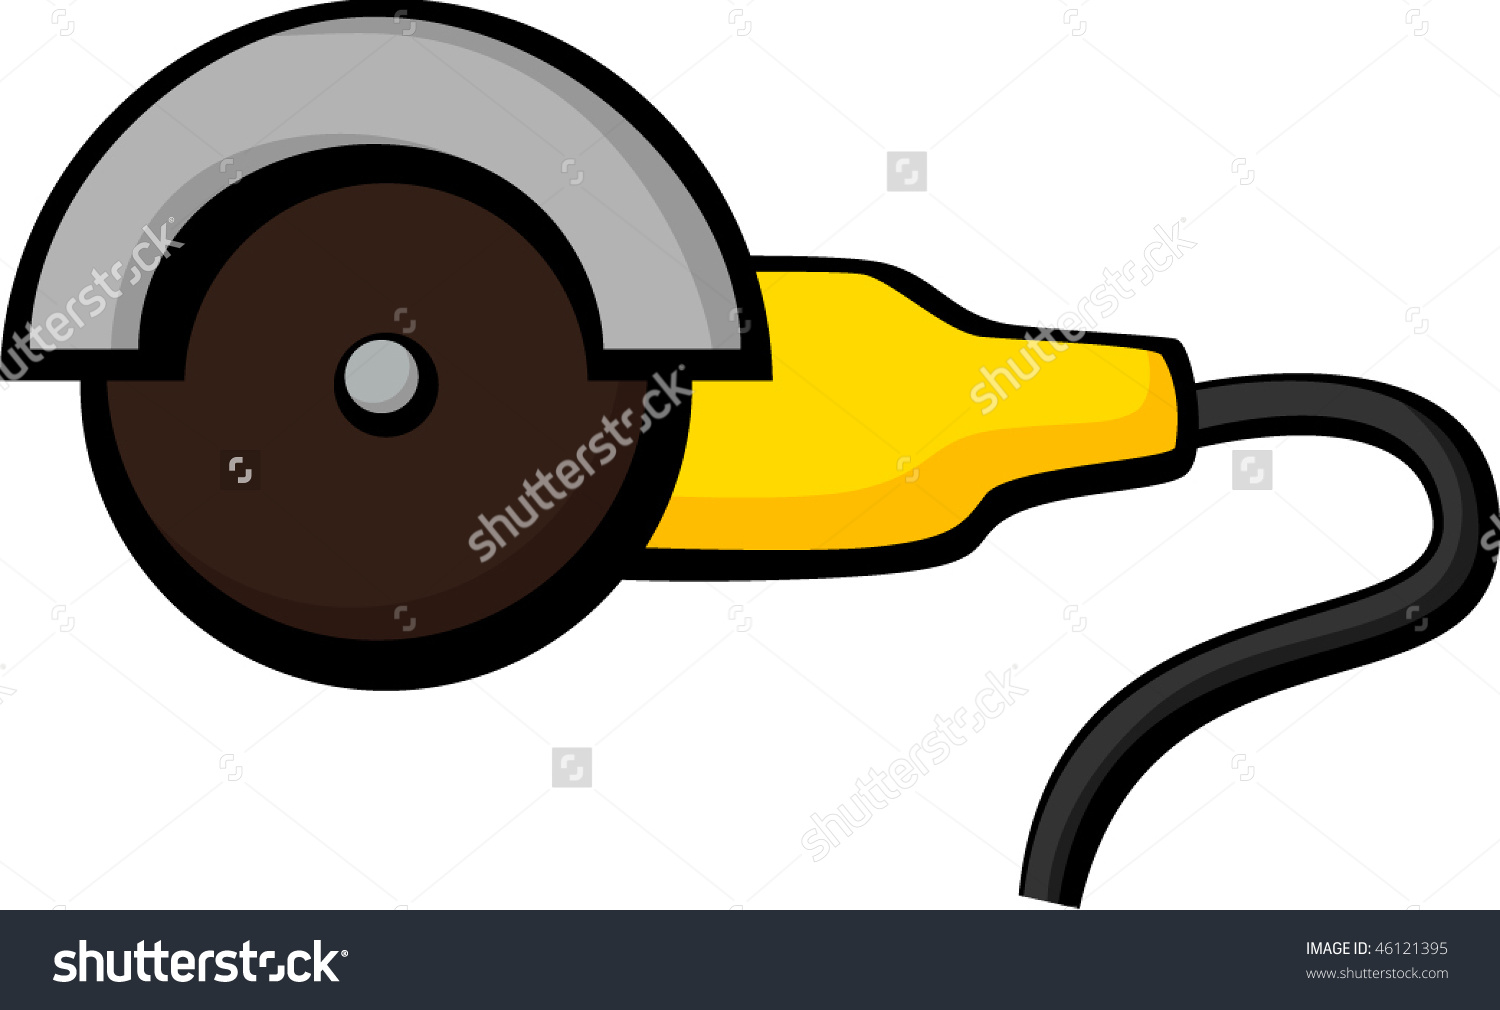 Clipart for power tools right angle grinder.